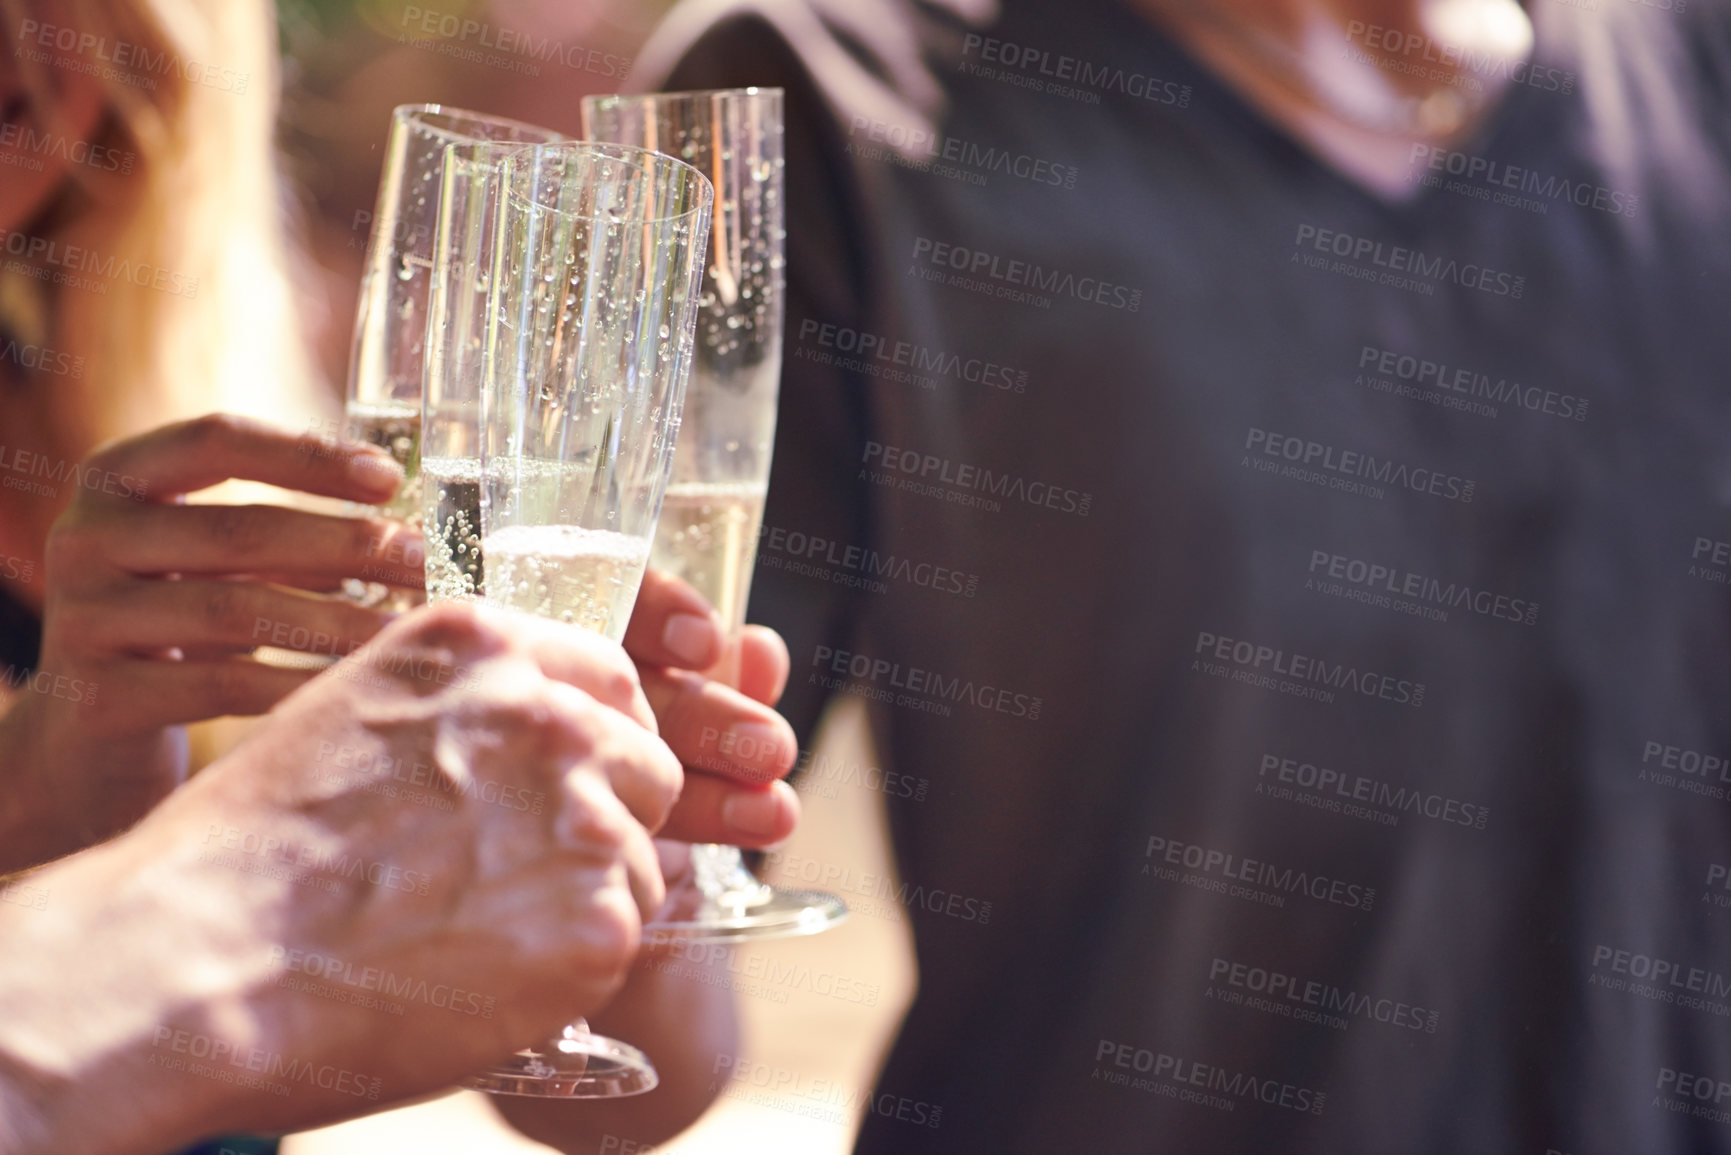 Buy stock photo Cropped shot of people drinking champagne together in an outdoor setting